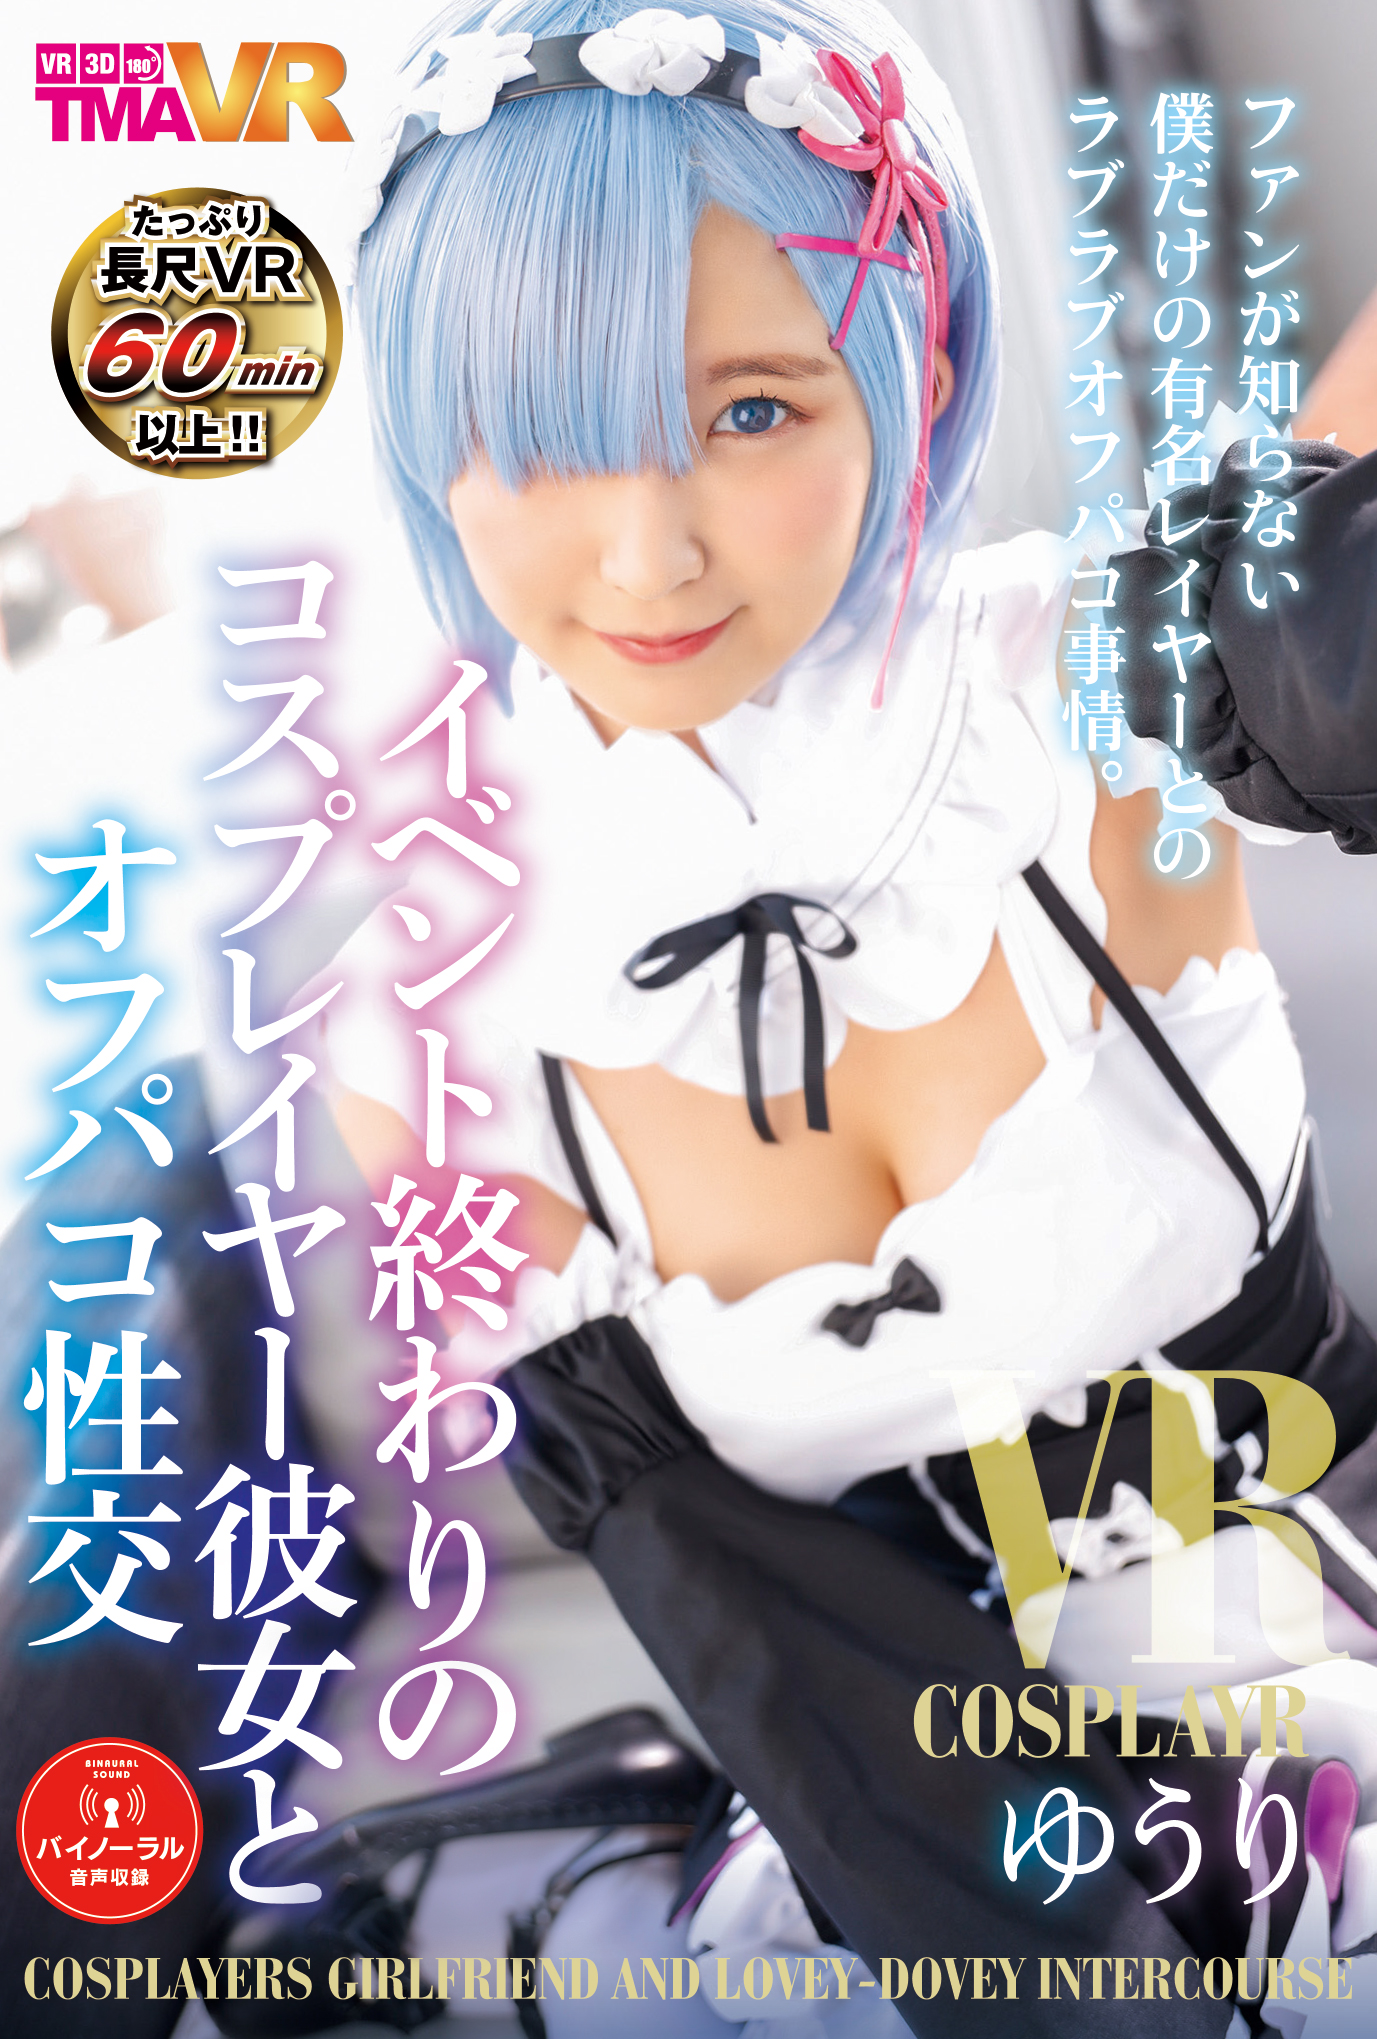 【Part01】Cosplayer at the end of the event Yuri VR  Porn Video 1